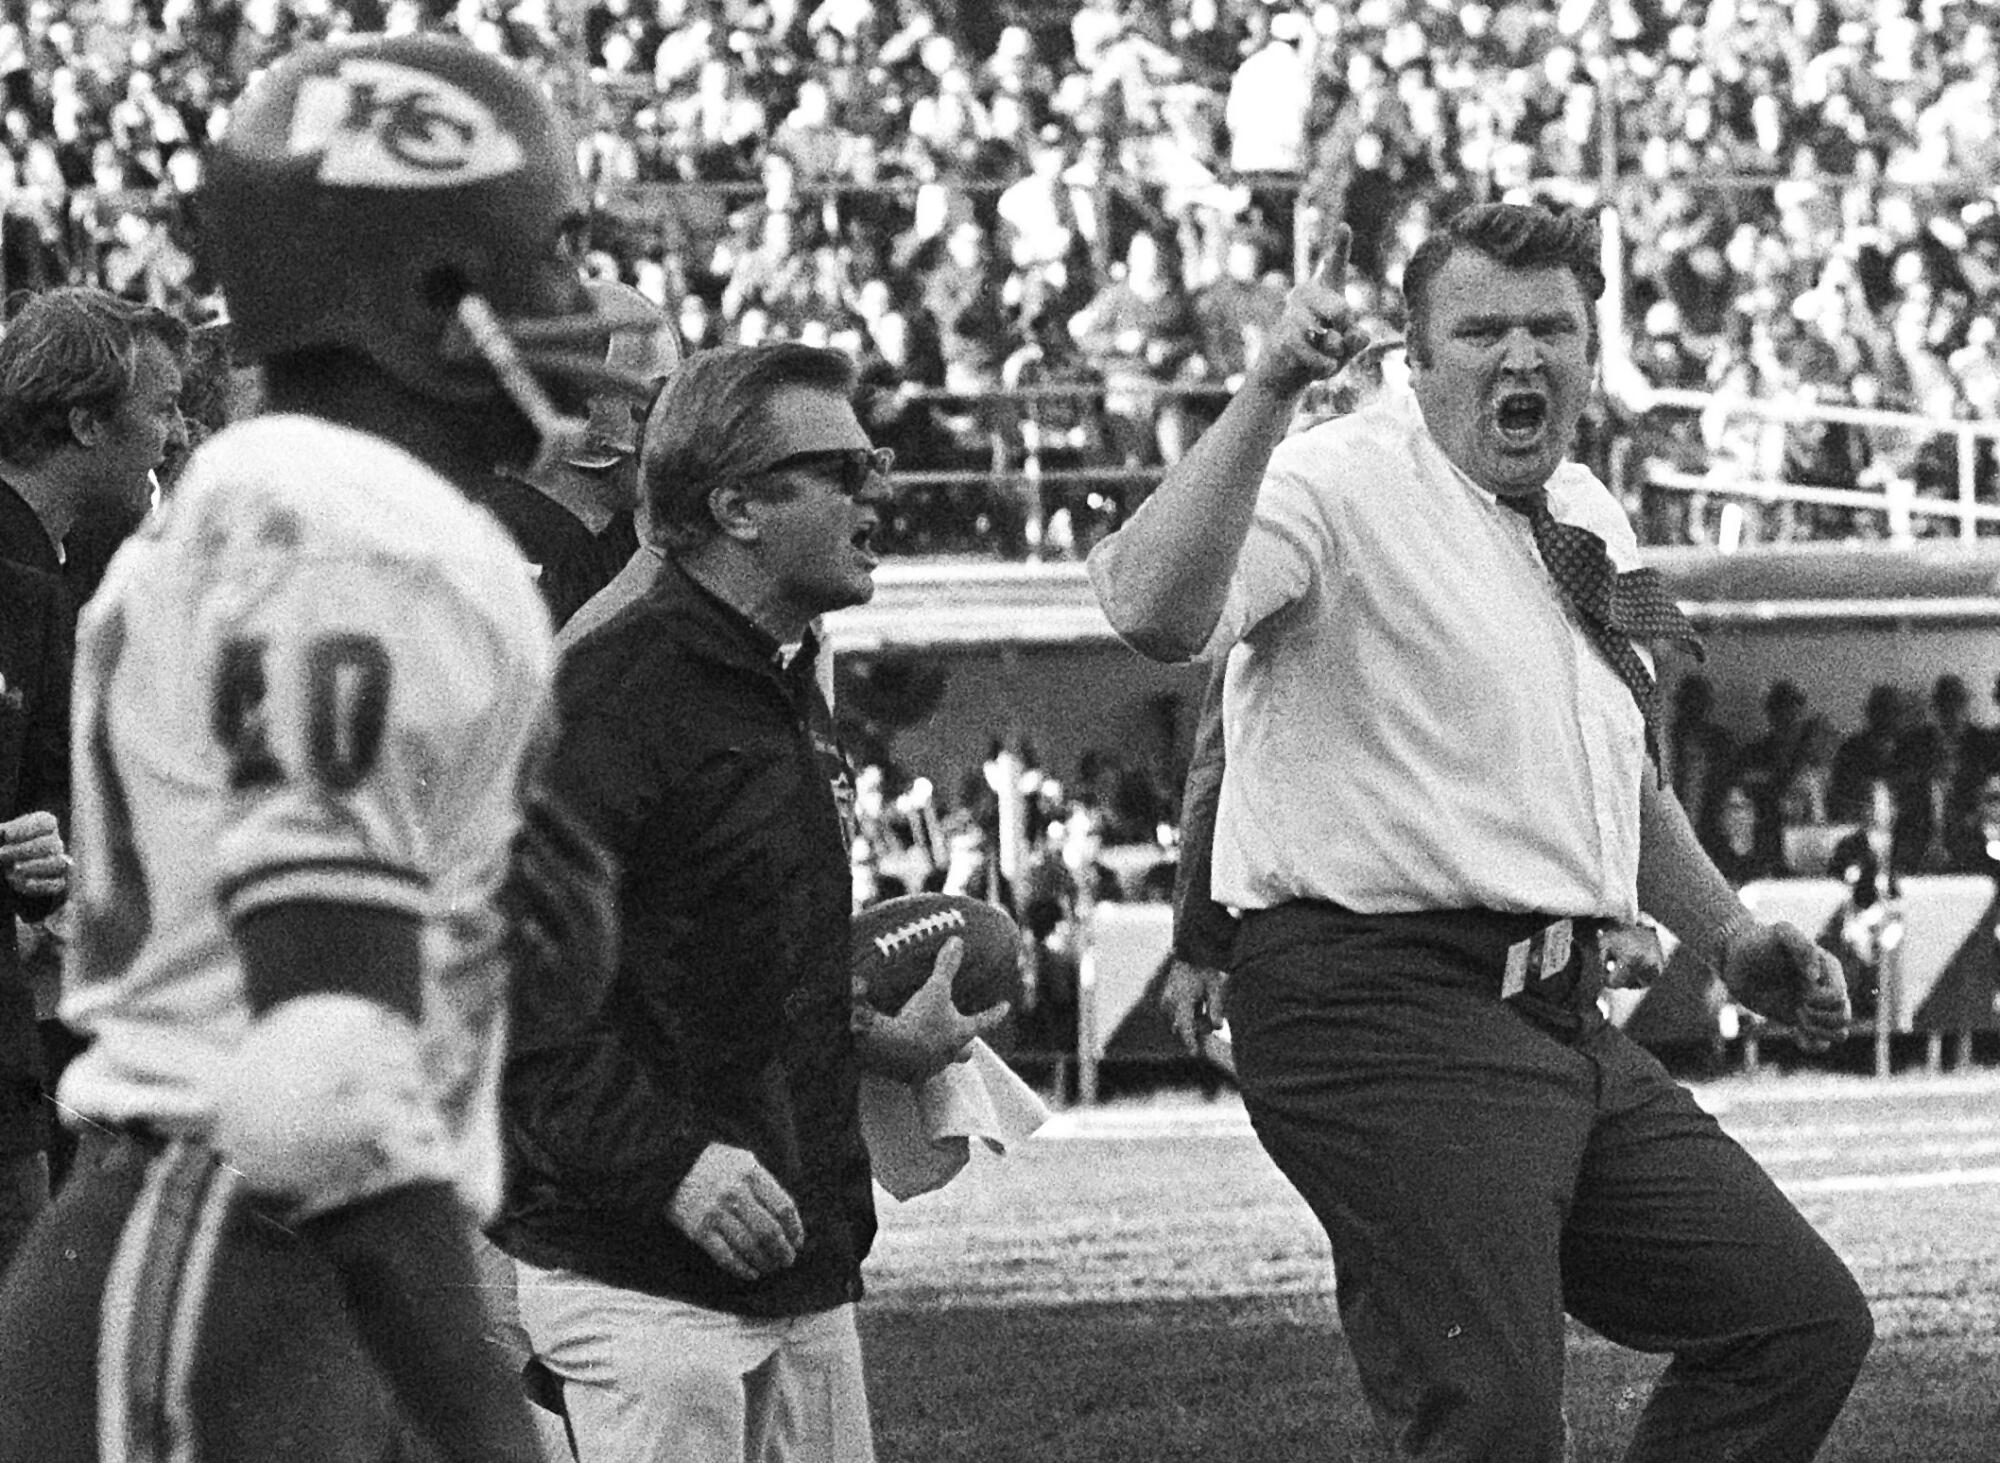 Oakland Raiders coach John Madden does a sort of jig as he waves his finger and shouts in protest at a referee's call.